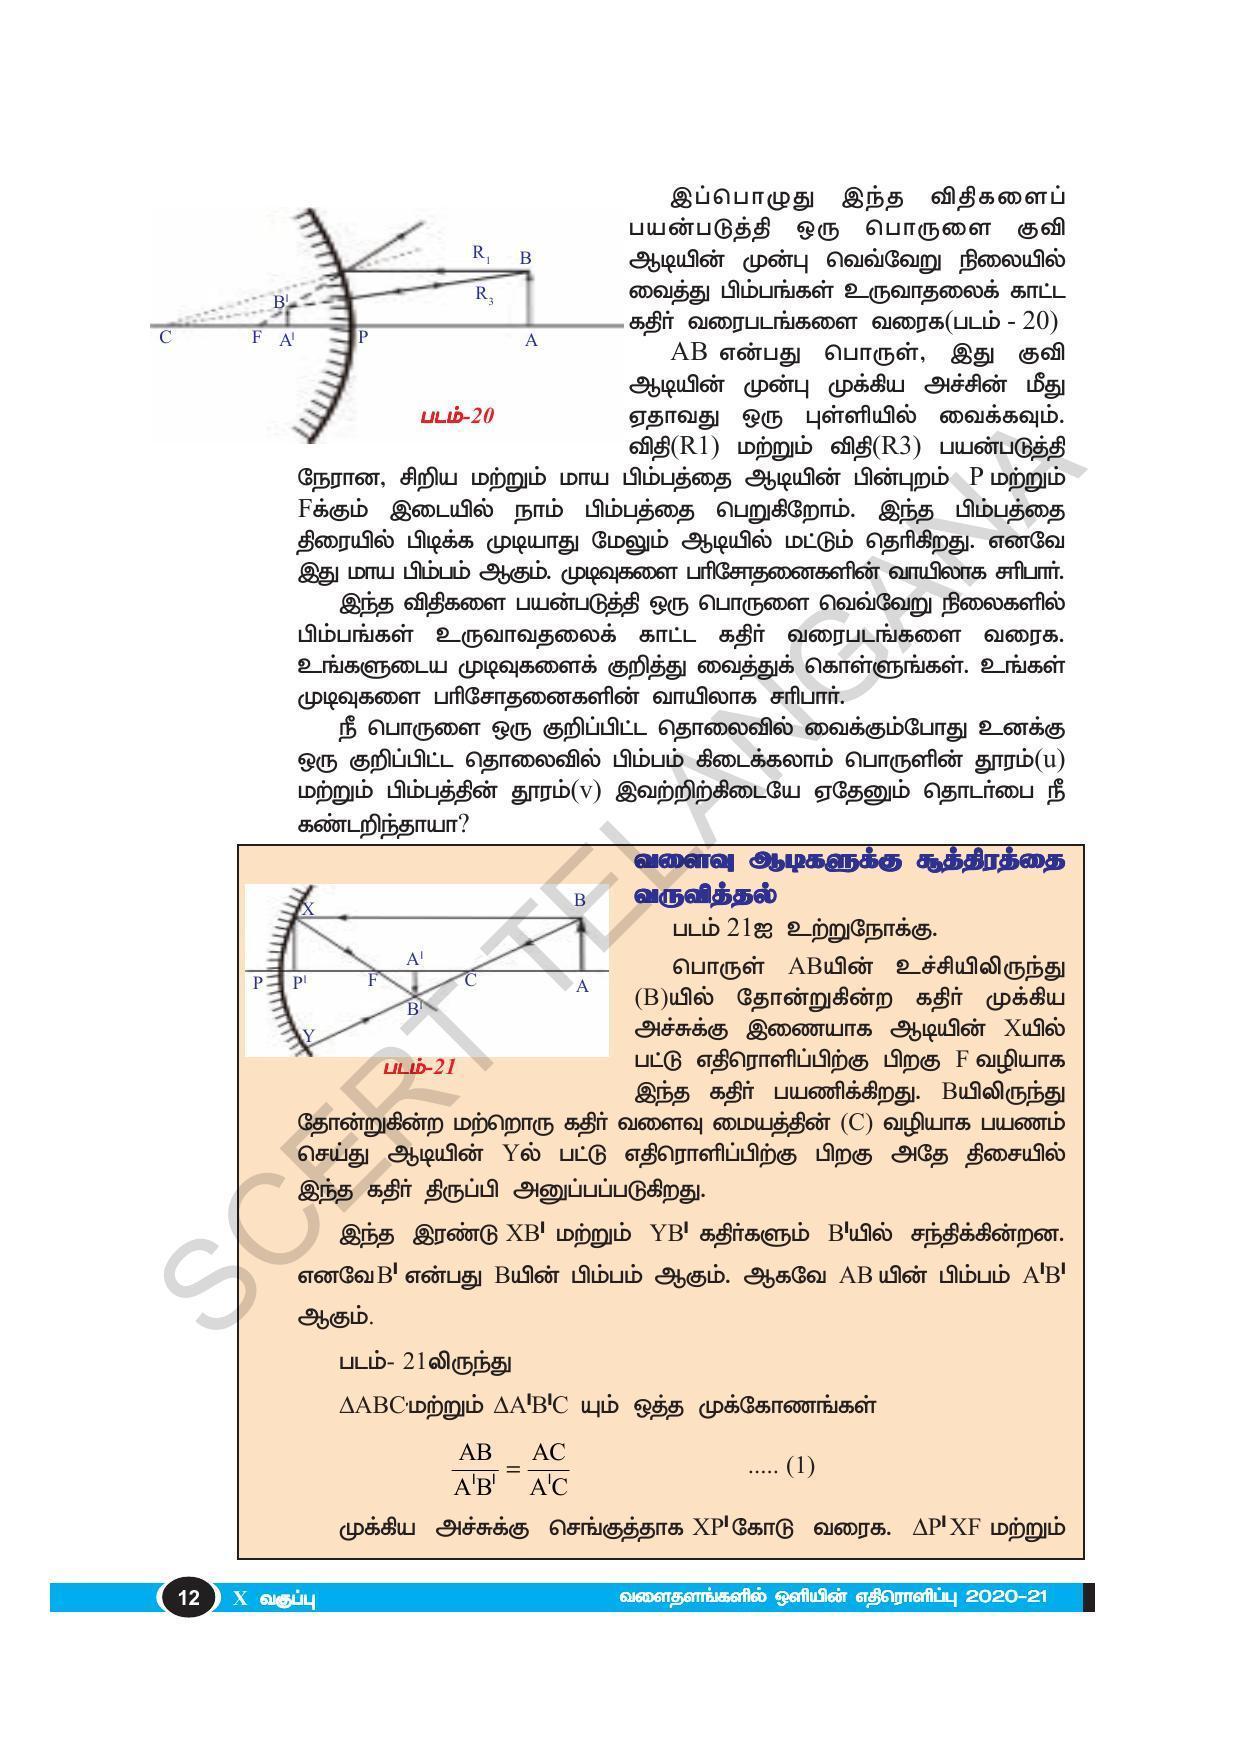 TS SCERT Class 10 Physical Science(Tamil Medium) Text Book - Page 24